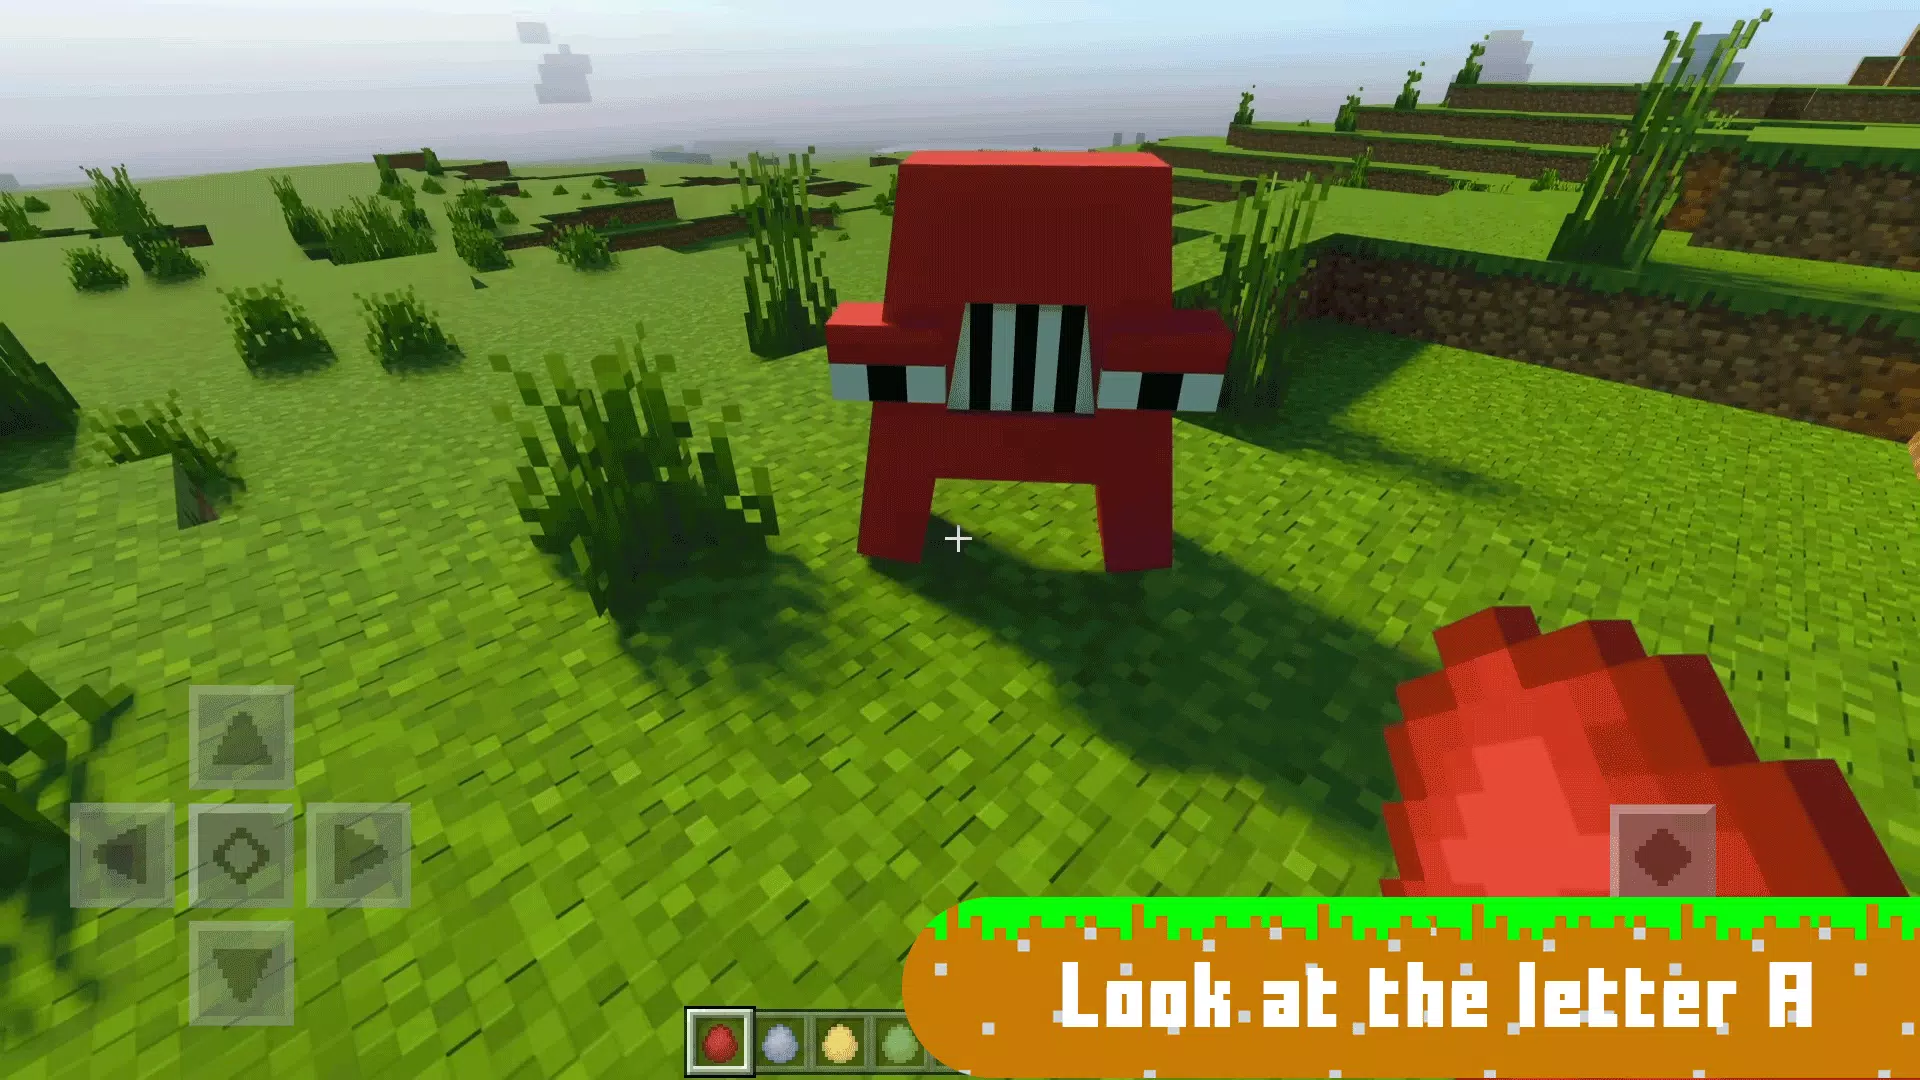 Download Alphabet Lore Mod for MCPE android on PC